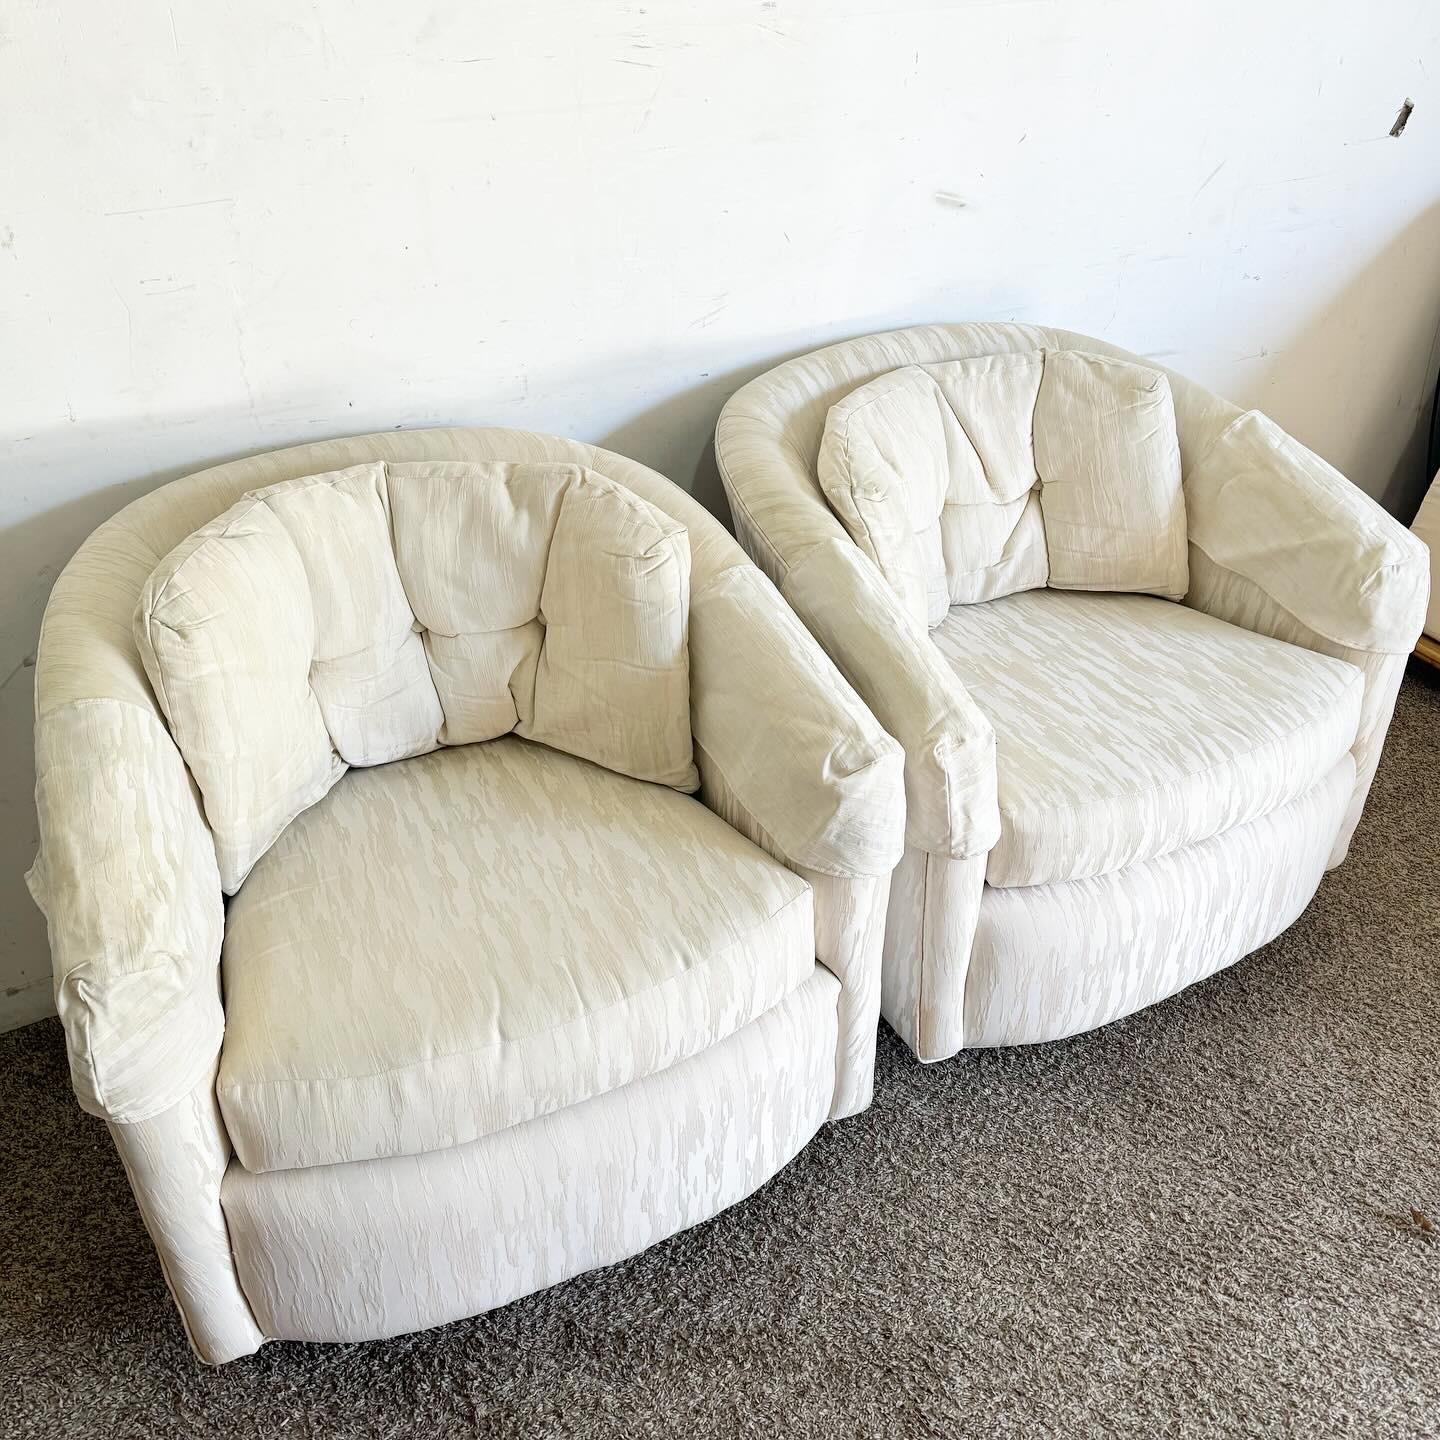 Late 20th Century Postmodern Tufted Barrel Swivel Chairs - a Pair For Sale